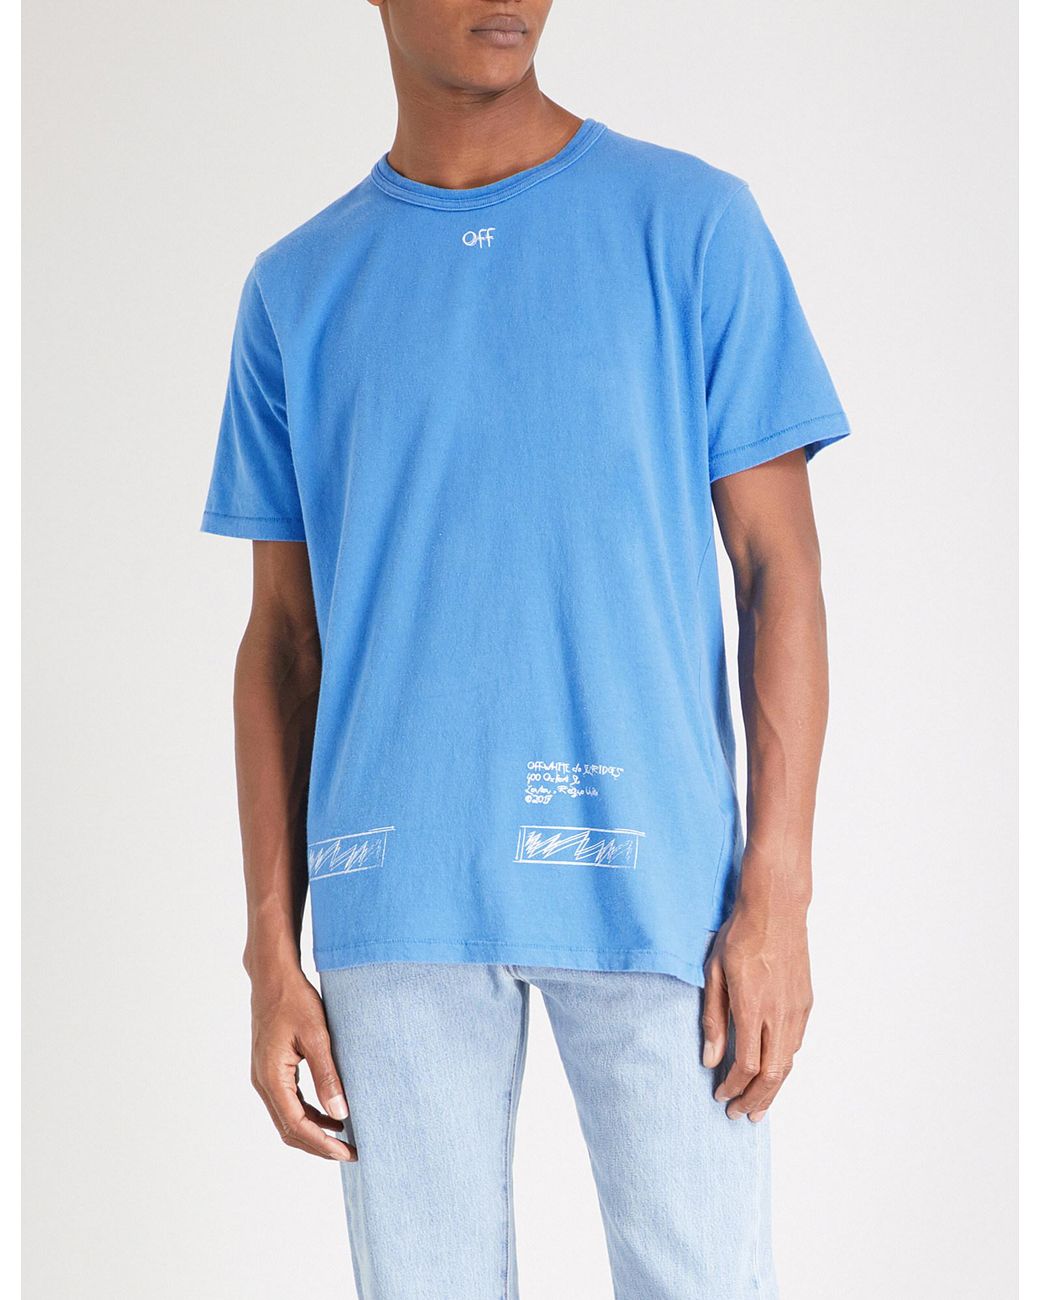 Off-White c/o Virgil Abloh London Cotton-jersey T-shirt in Blue for 